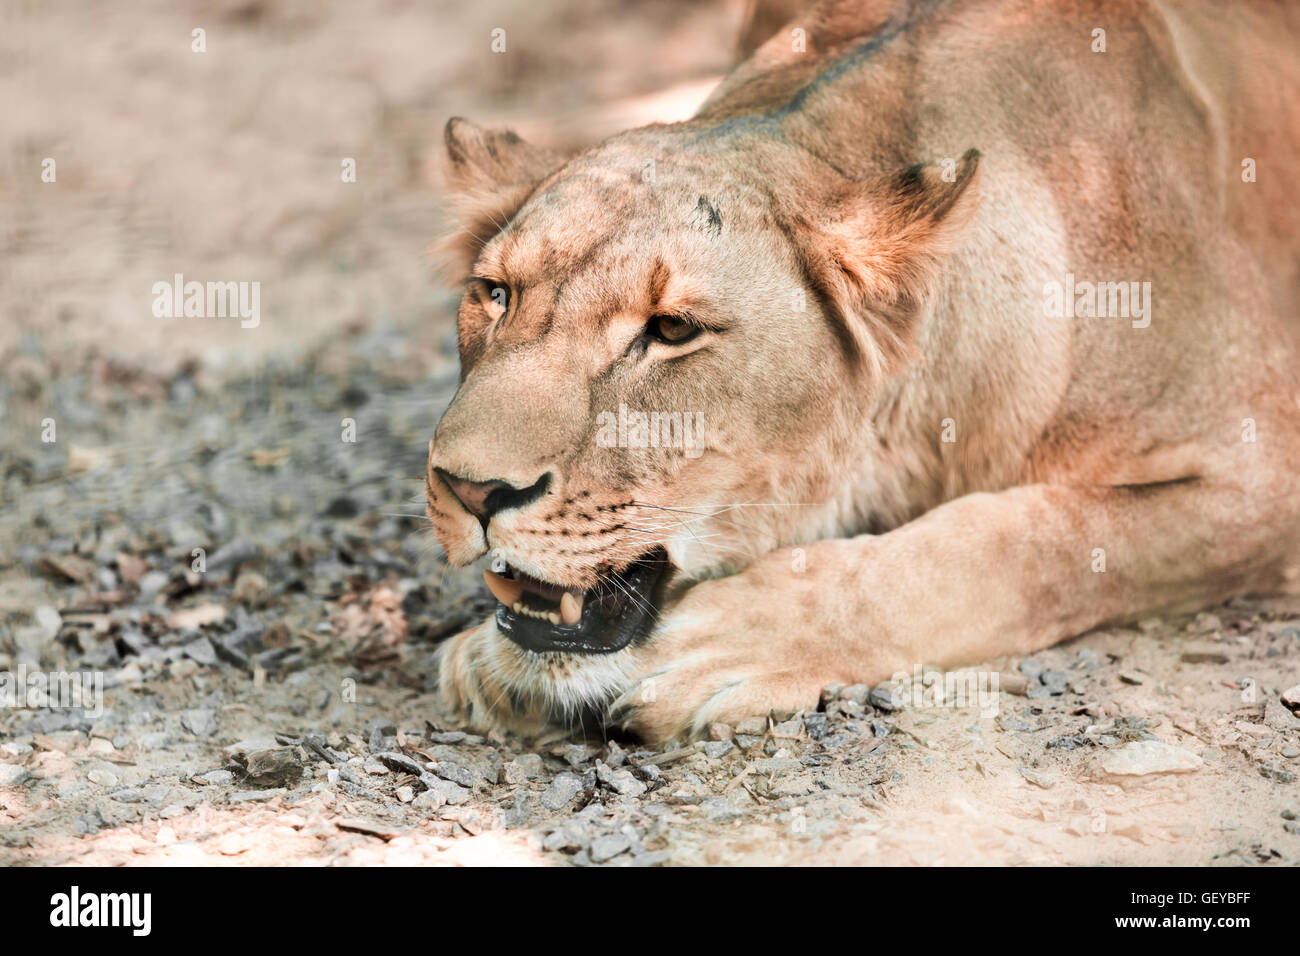 portrait the animal African lioness lying close-up Stock Photo